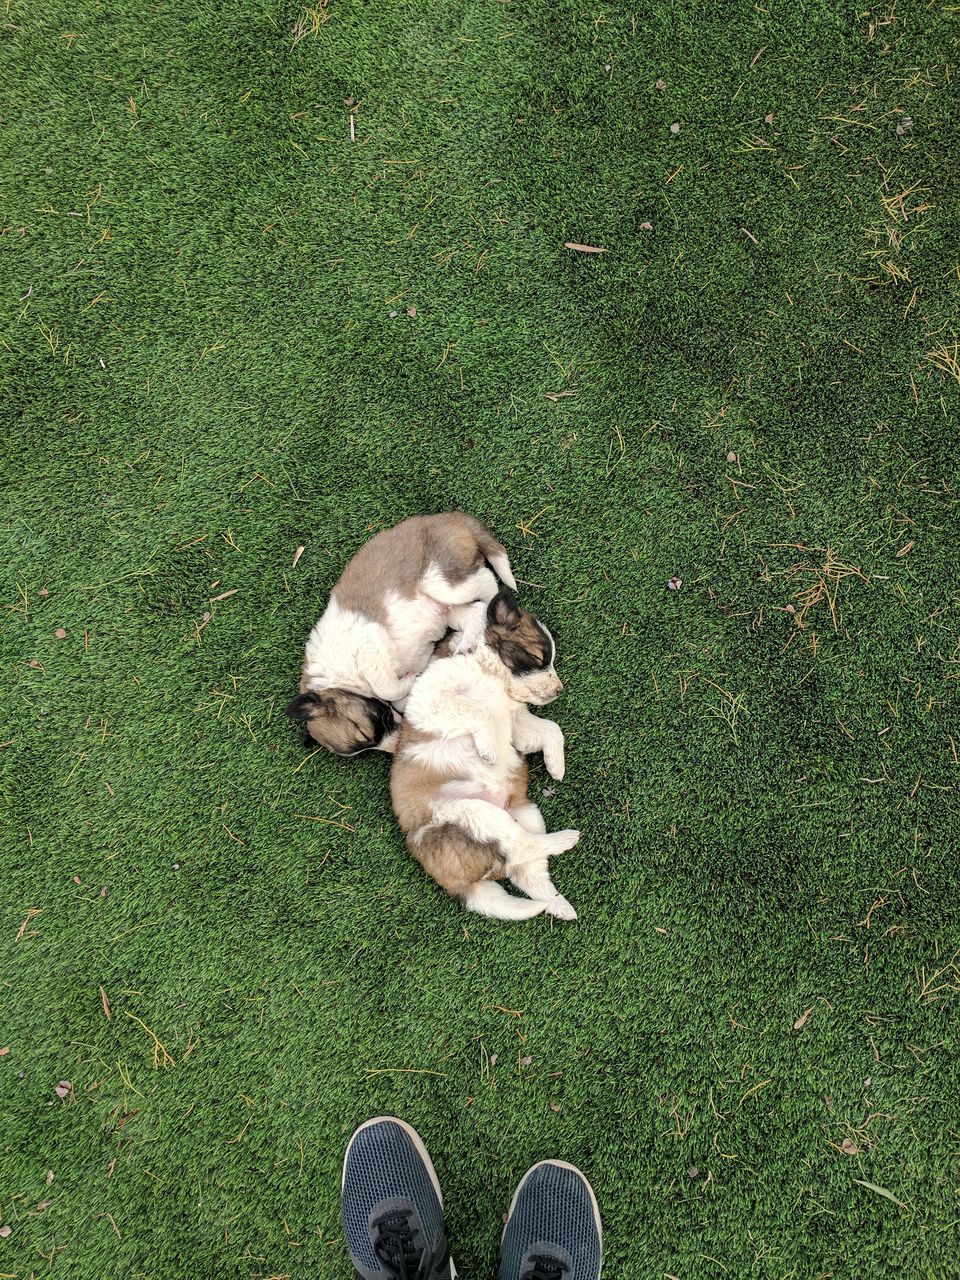 HIGH ANGLE VIEW OF DOG ON FIELD